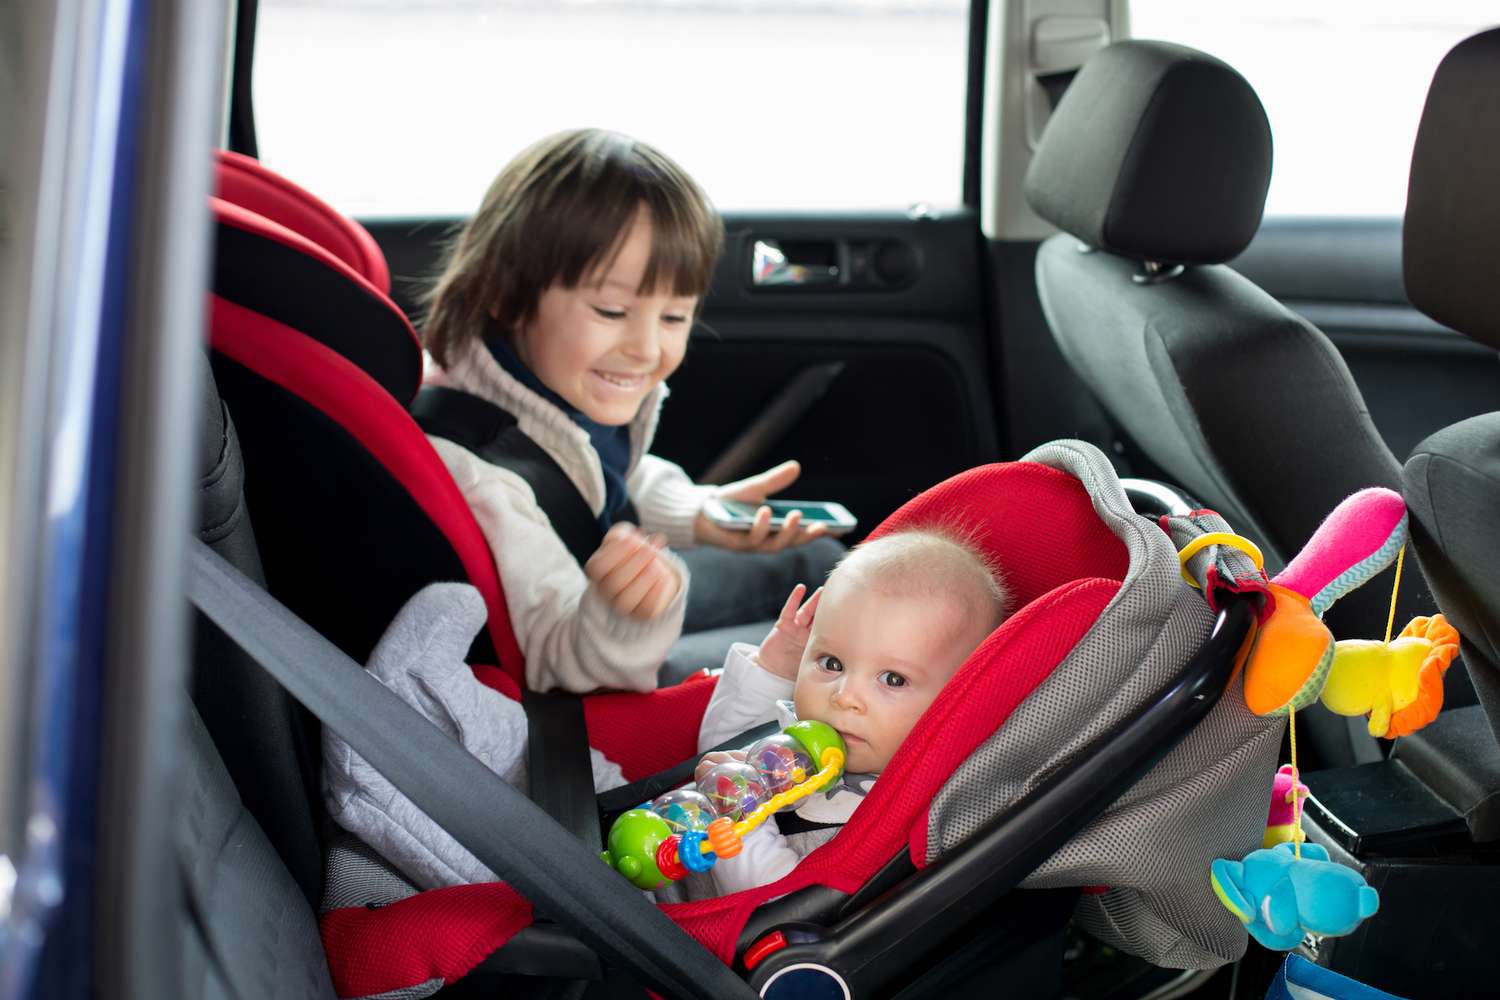 How To Choose The Right Car Seat For Your Child Pas - What Is The Weight Limit On An Infant Car Seat